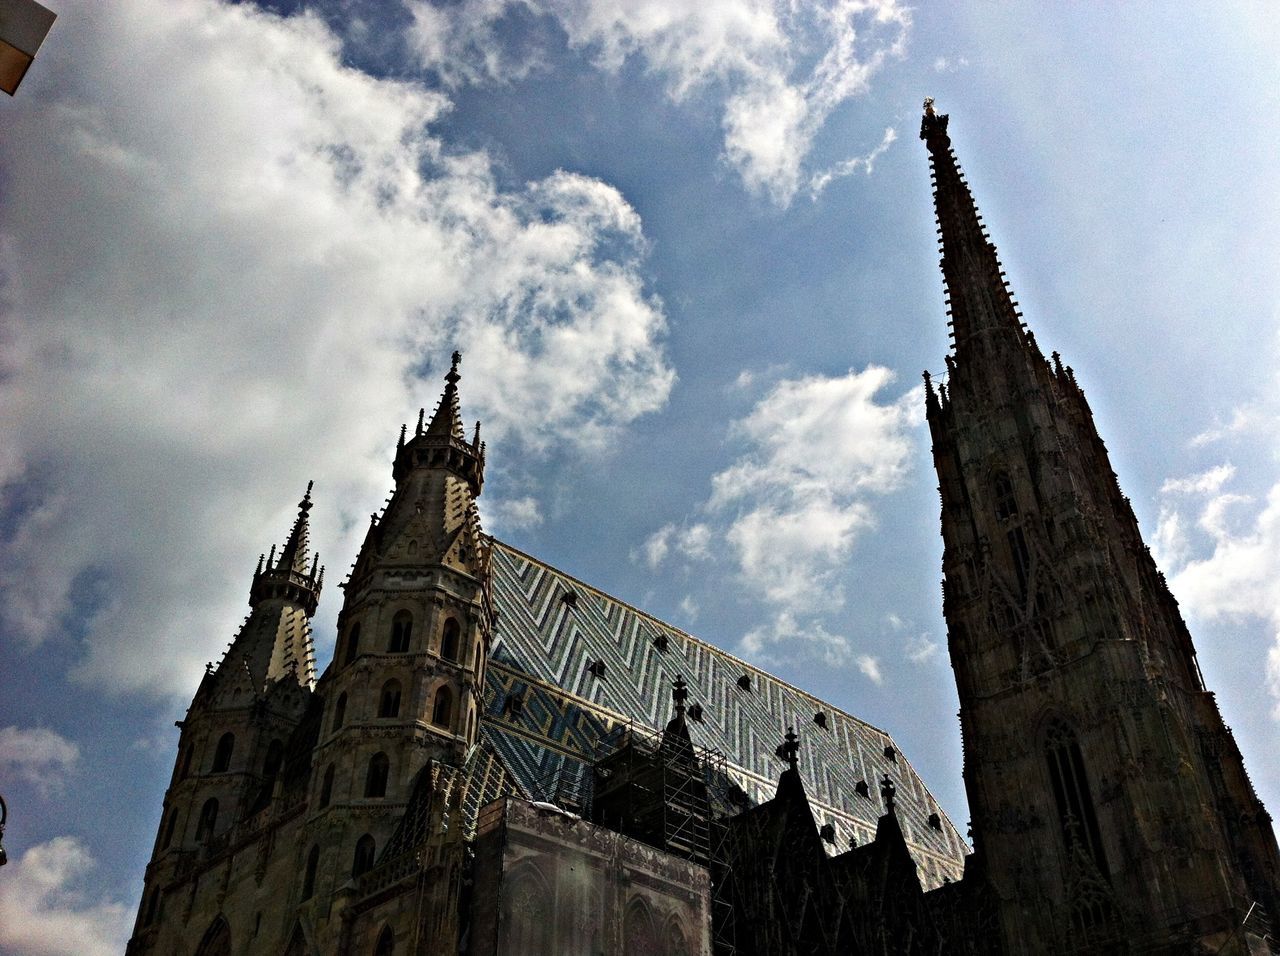 religion, architecture, low angle view, place of worship, building exterior, built structure, sky, spirituality, church, cloud - sky, cathedral, history, tower, cross, old, steeple, cloud, cloudy